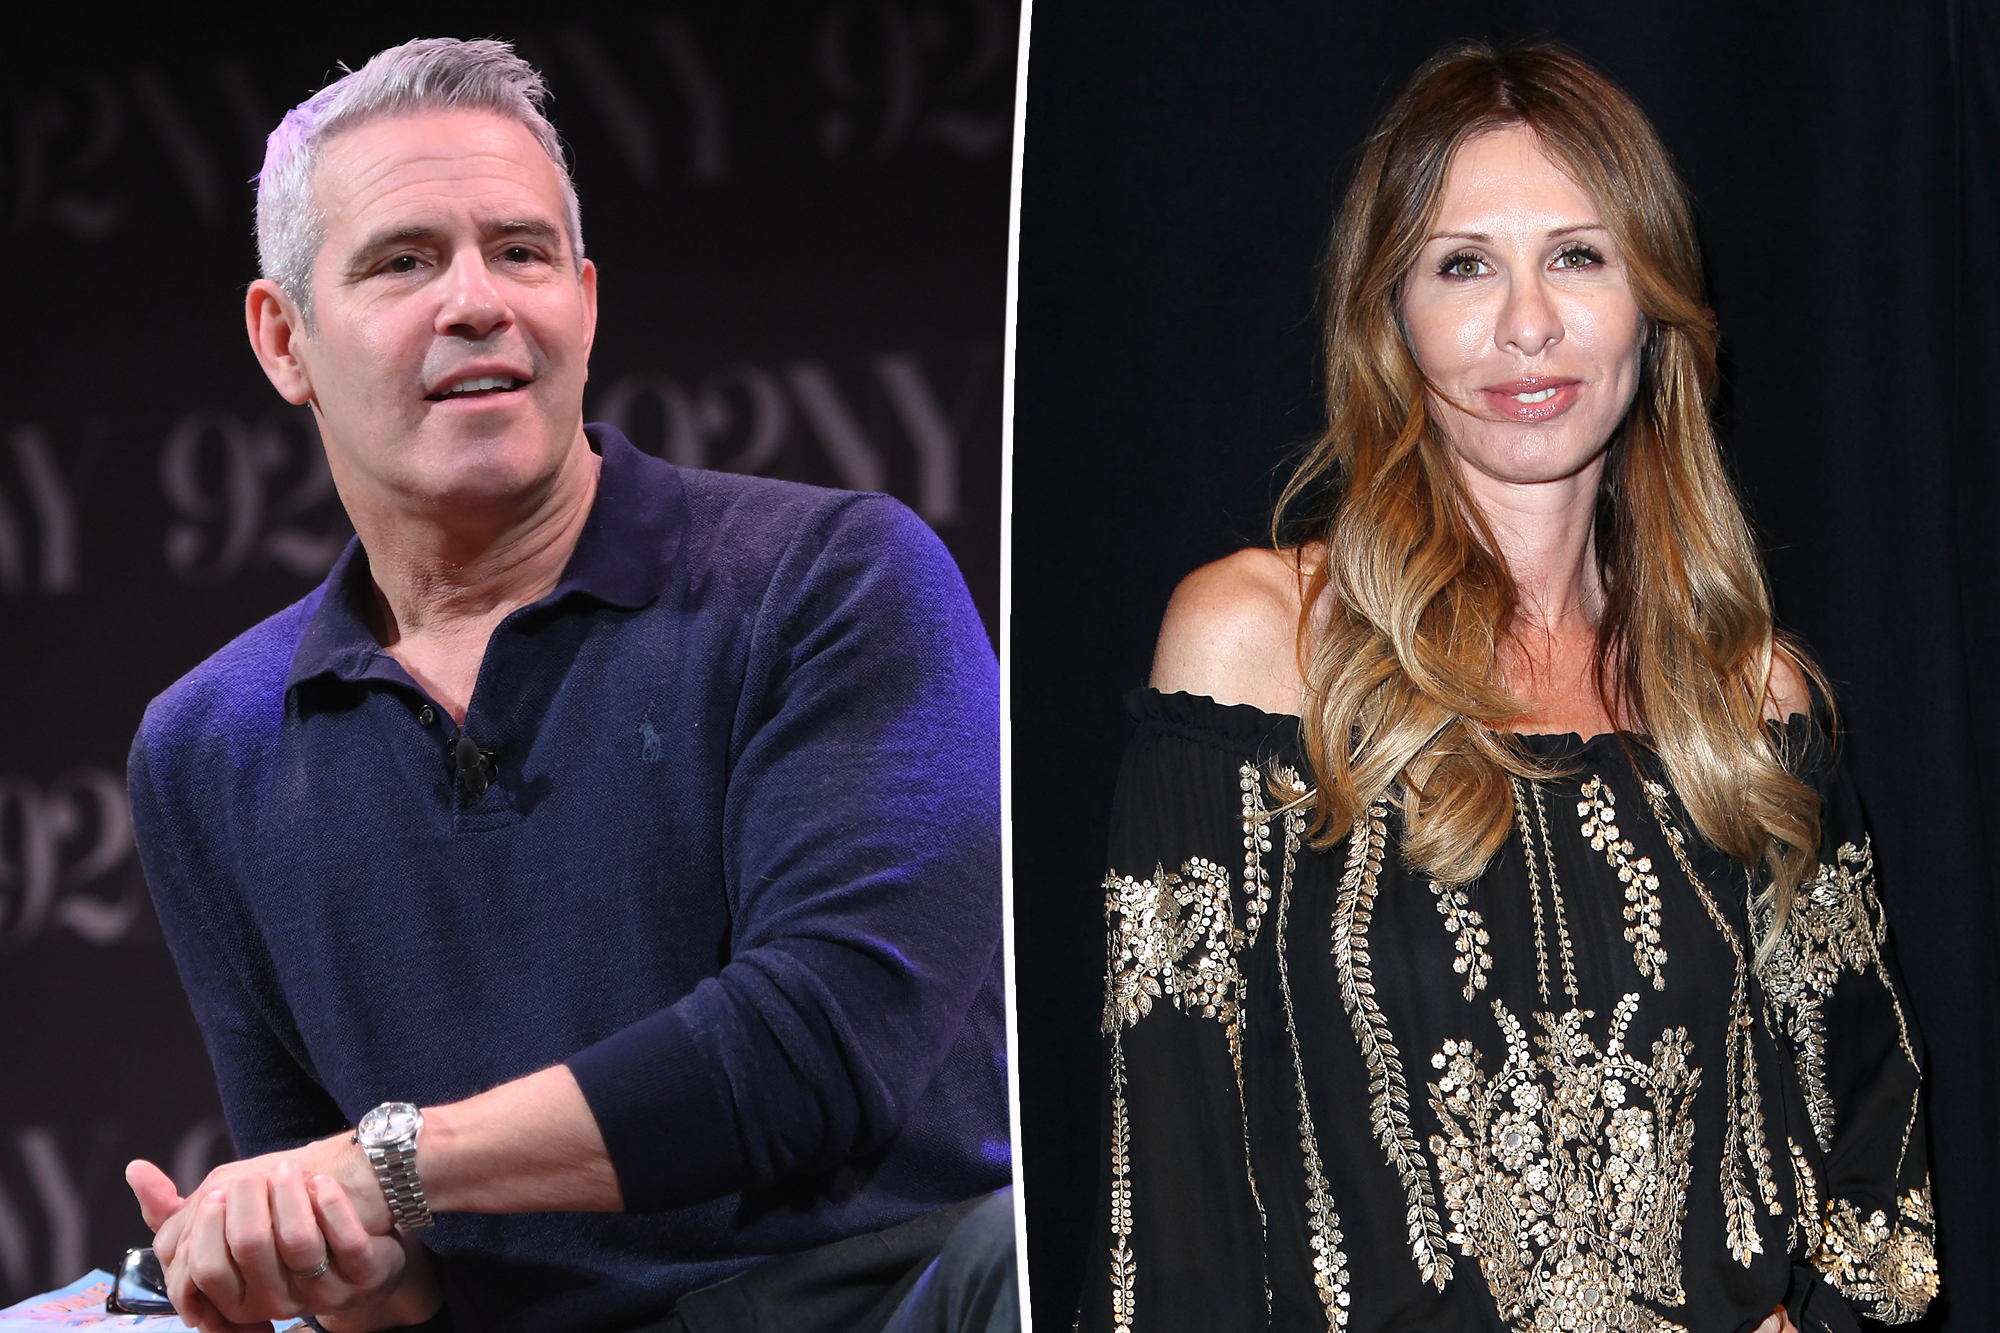 Carole Radziwill Takes a Stand Against Andy Cohen's Accusations